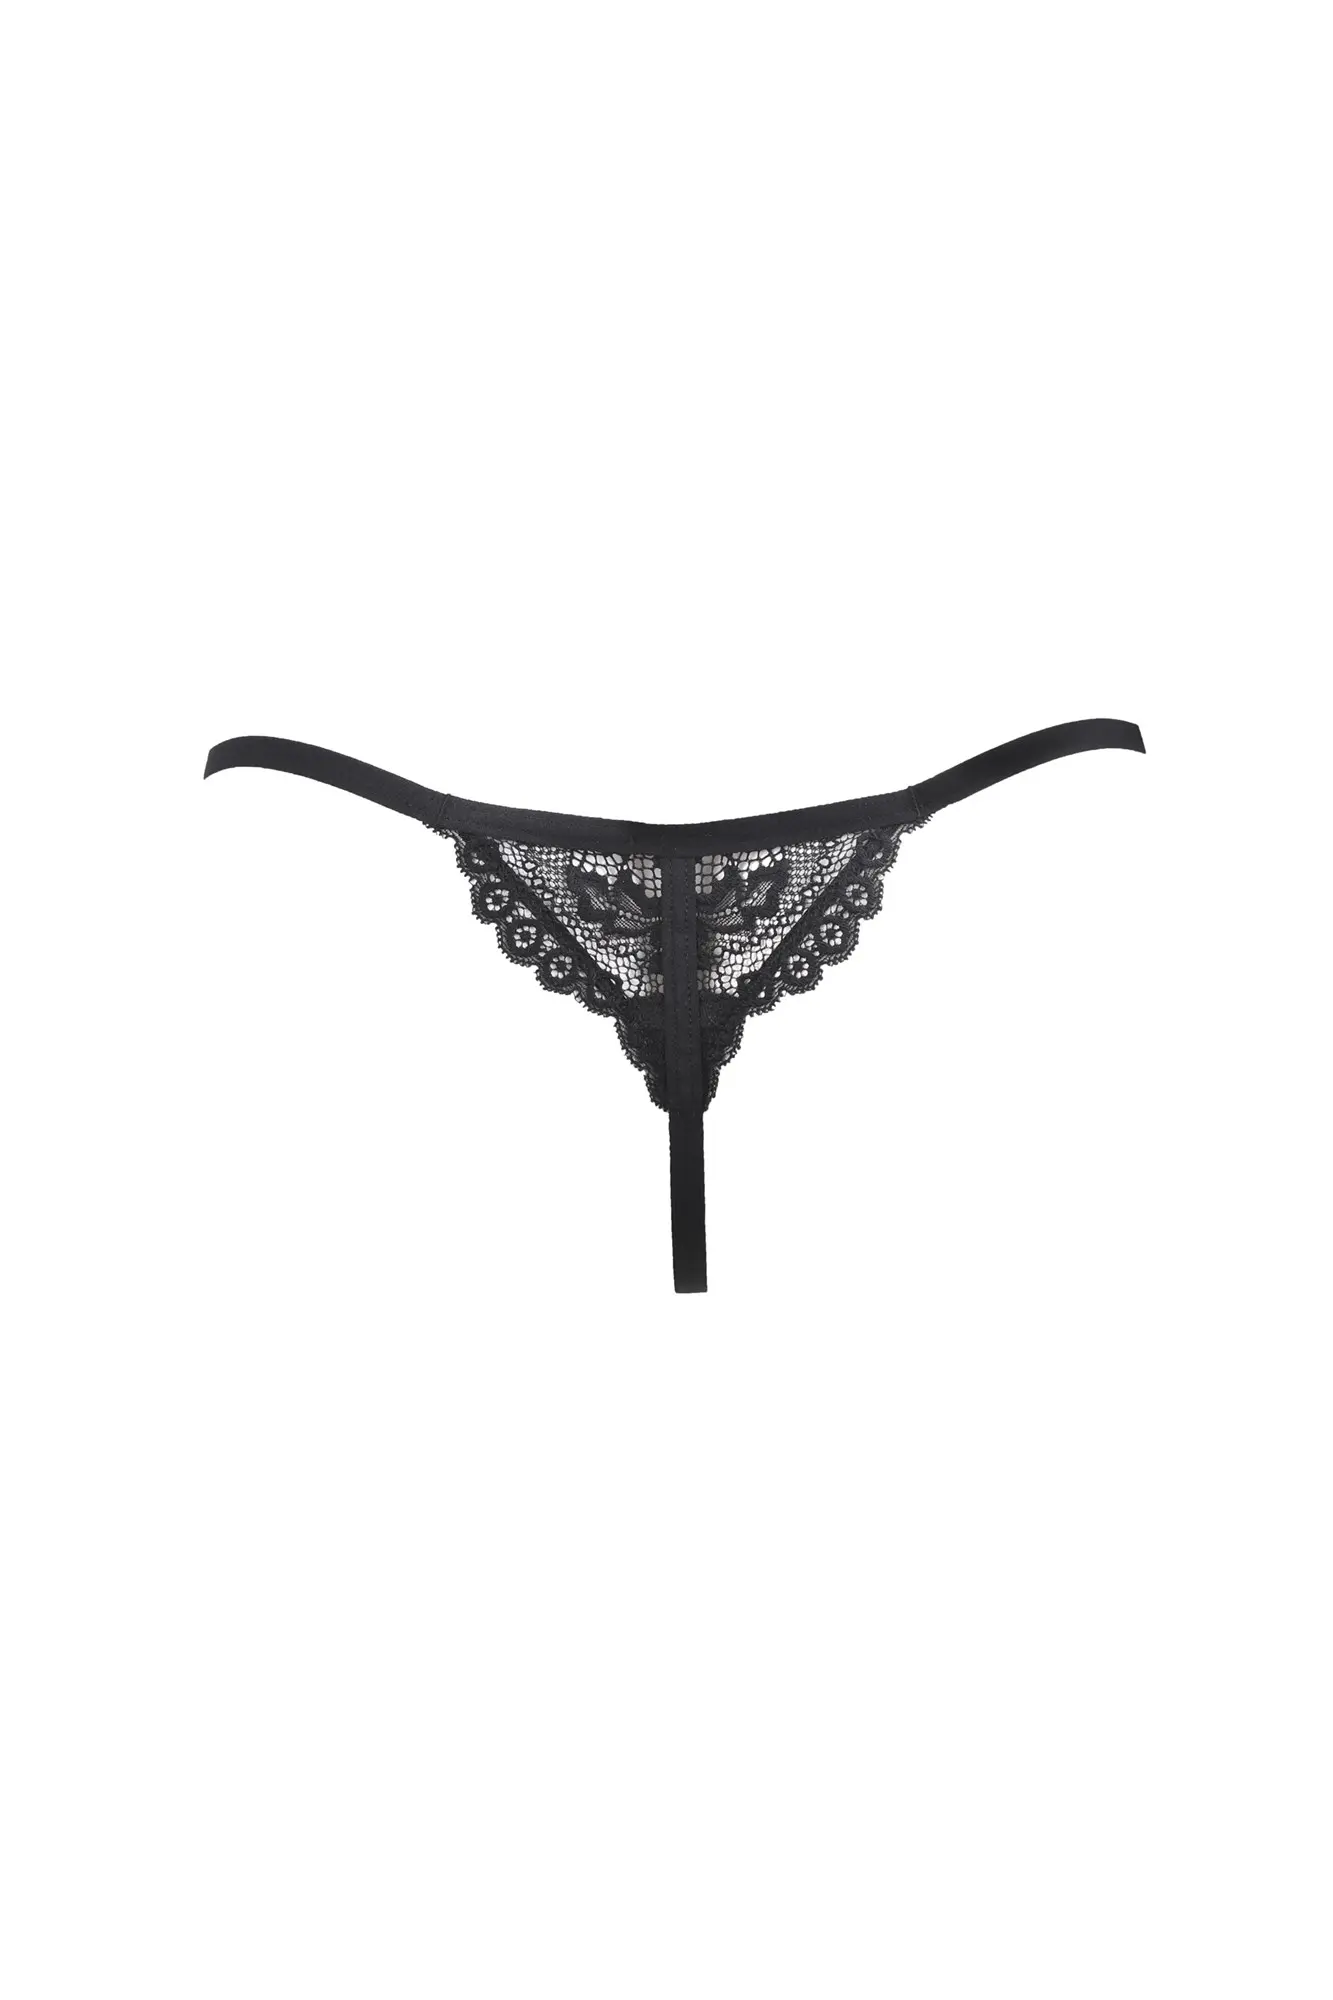 Contradiction Statement Thong, Pour Moi, Statement Thong